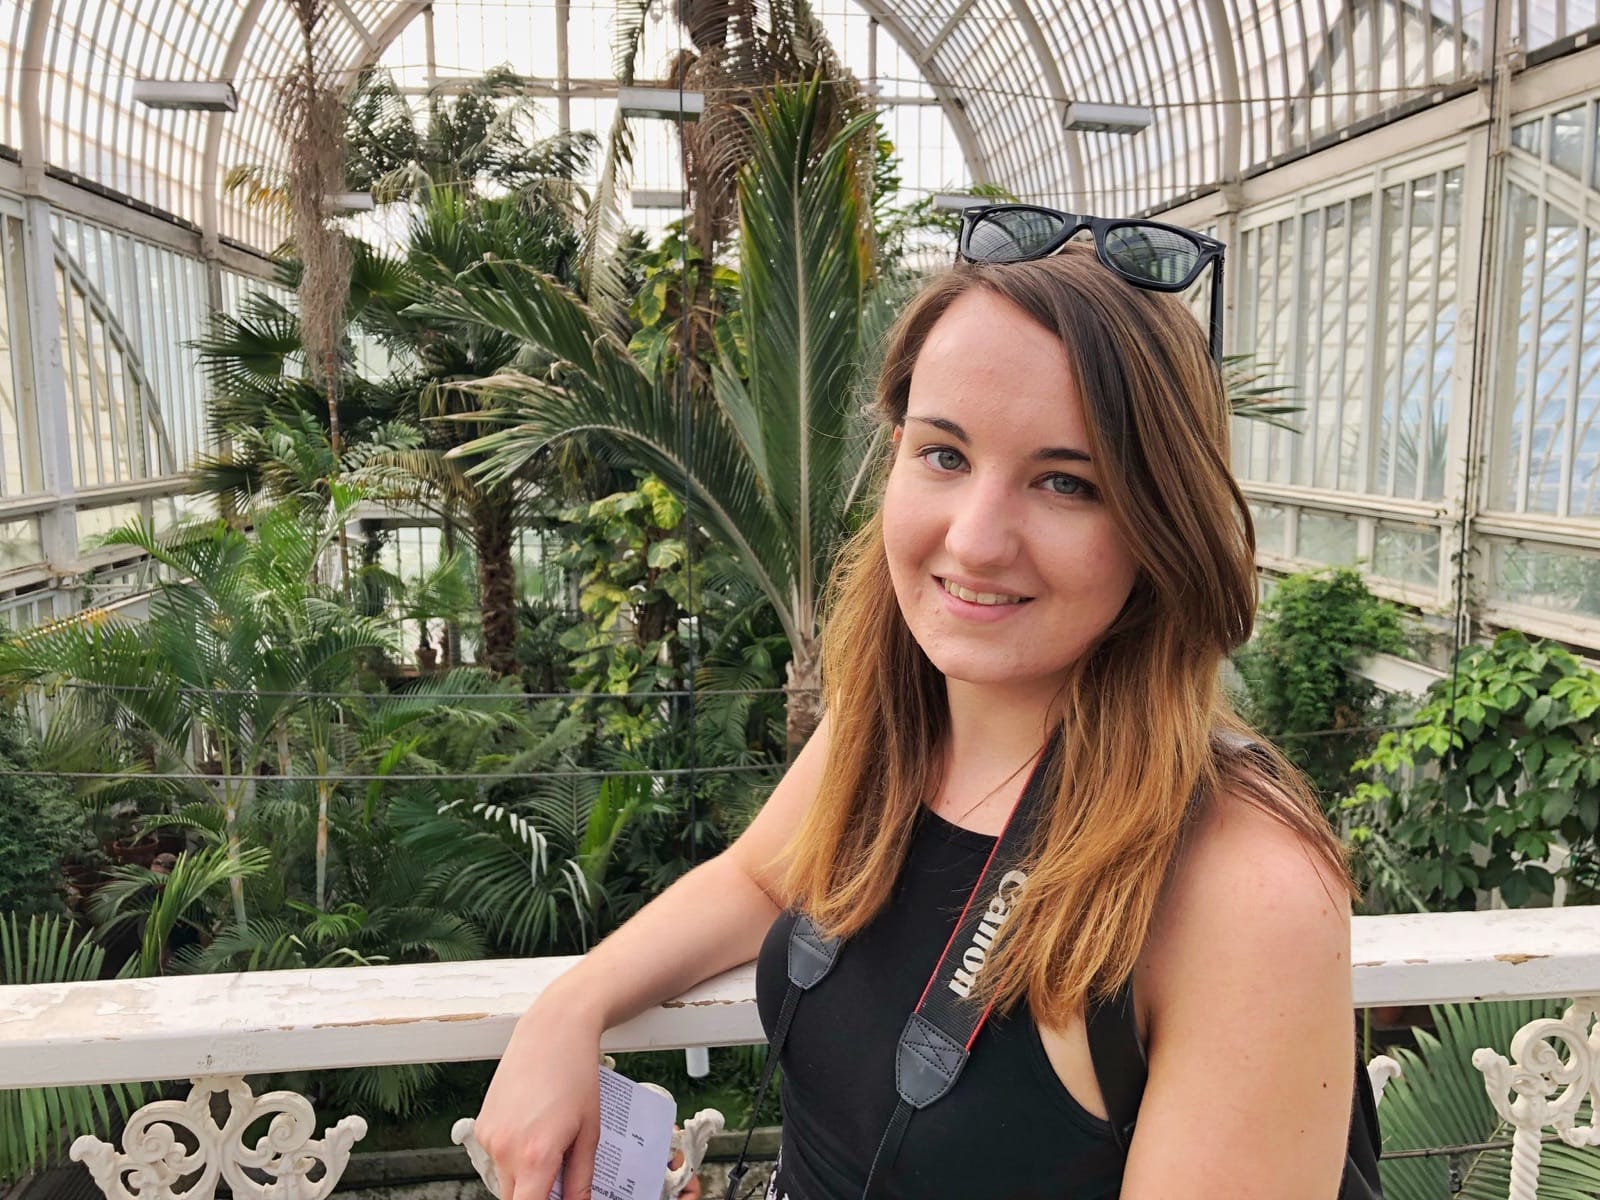 A woman with brown hair leaning on a rail inside of a greenhouse. She has glasses on top of her head.